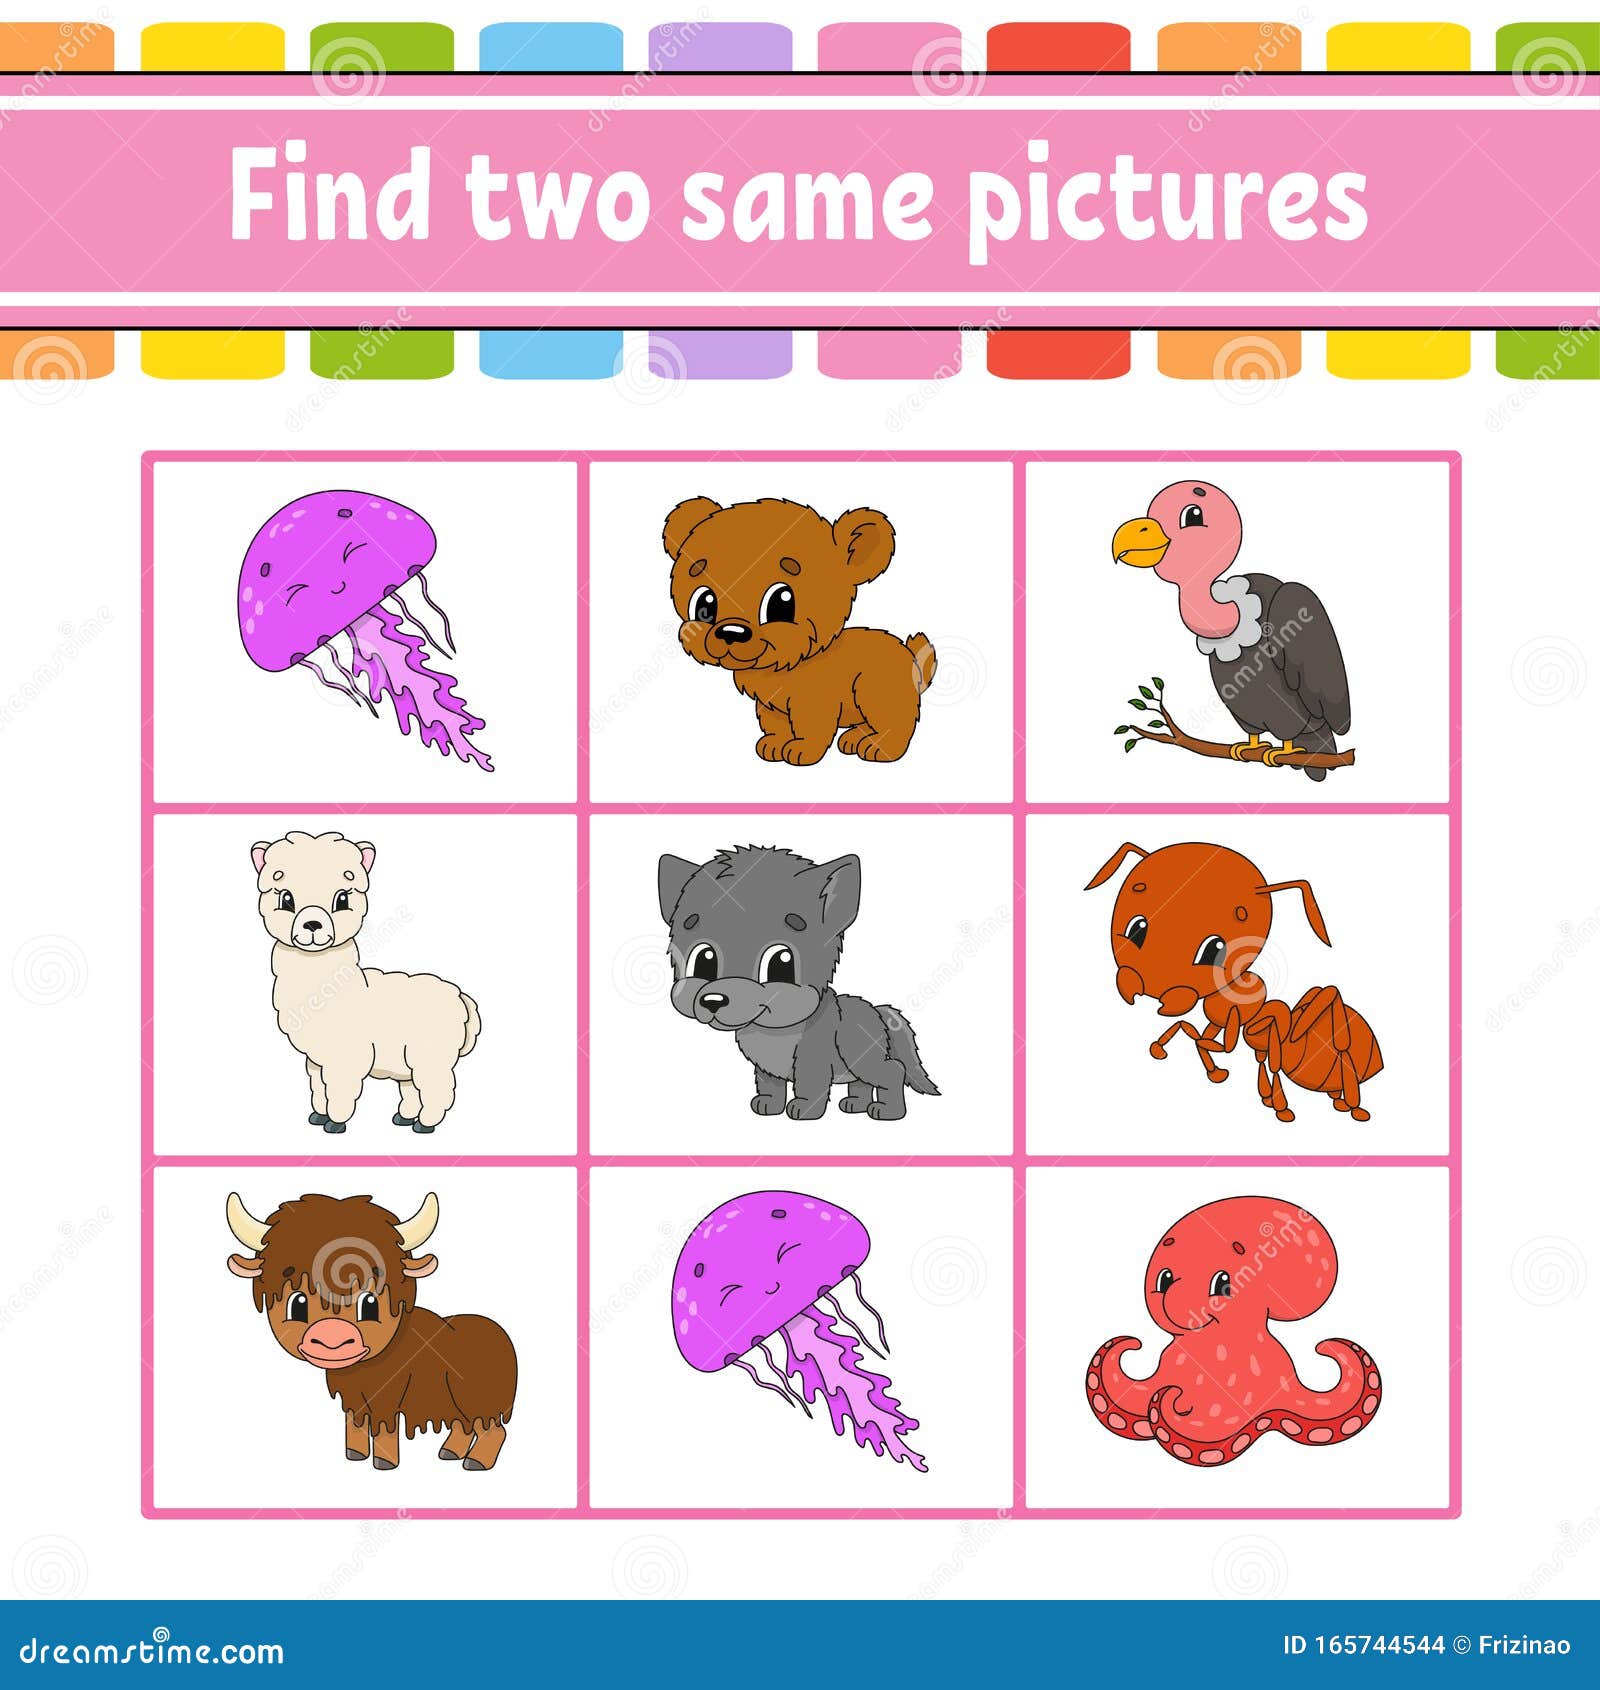 Find you 2 game. Альпака задания картинки для малышей. Two same pictures. Same picture шаблон. Find two the same pictures.